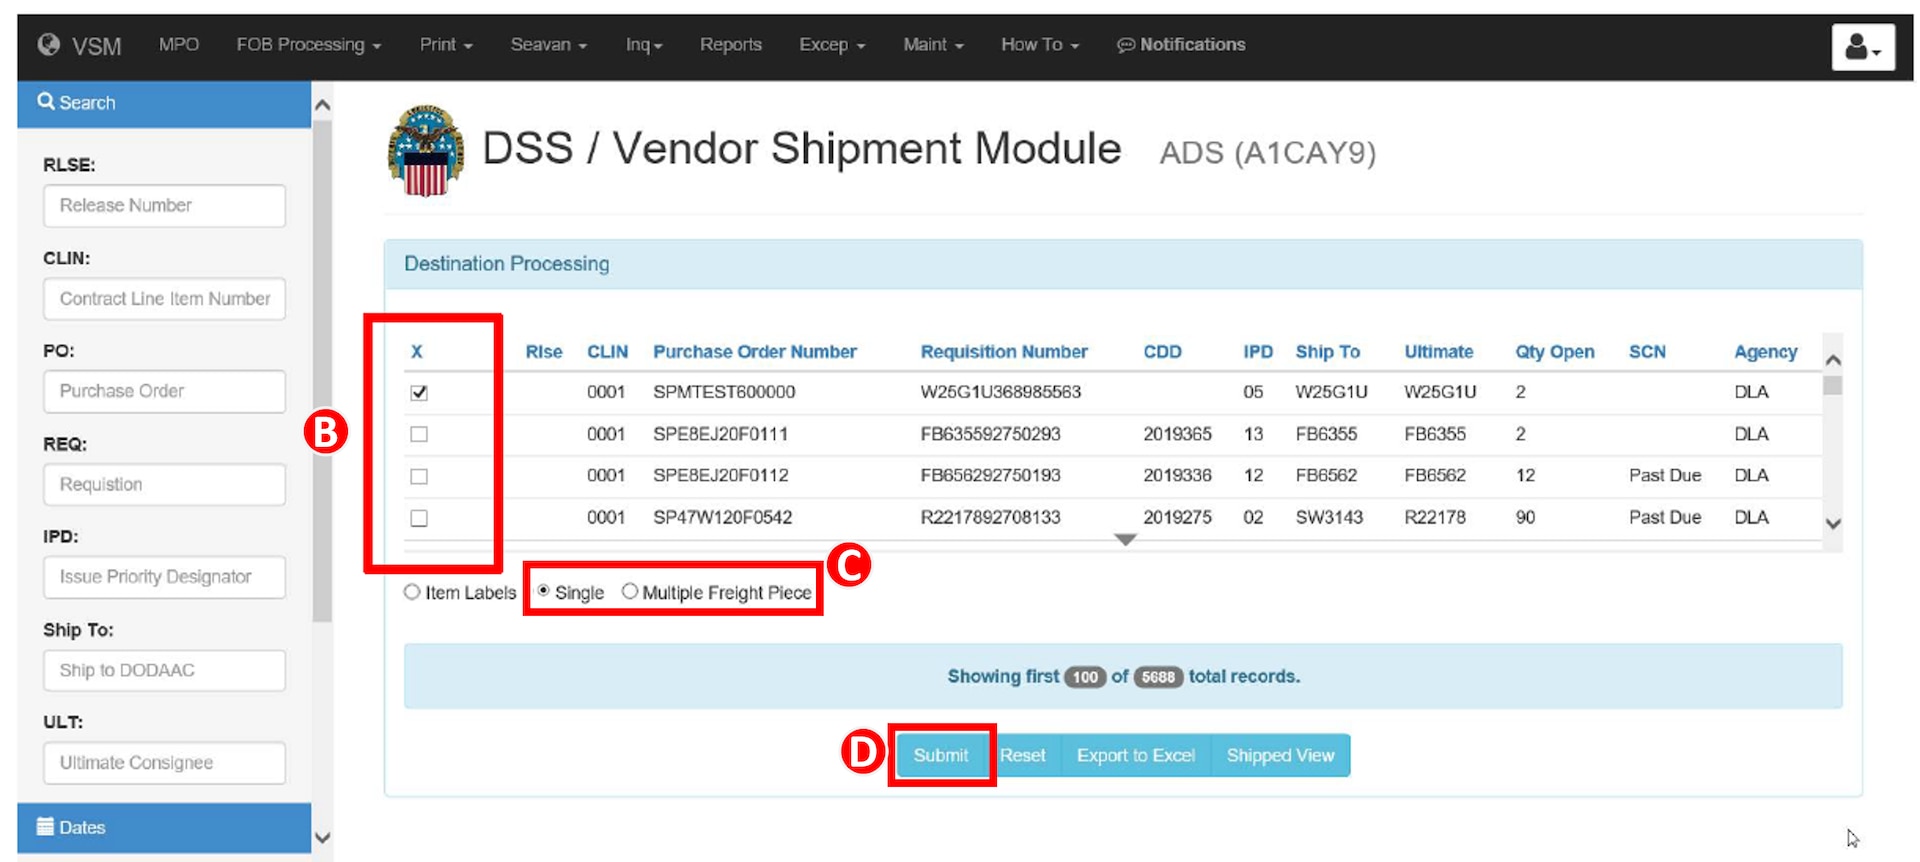 Confirm which contracts in Vendor Shipment Module need shipping documents, select the Single or Multiple radio button, and submit information. Please see adjacent text or context for equivalent information of image.